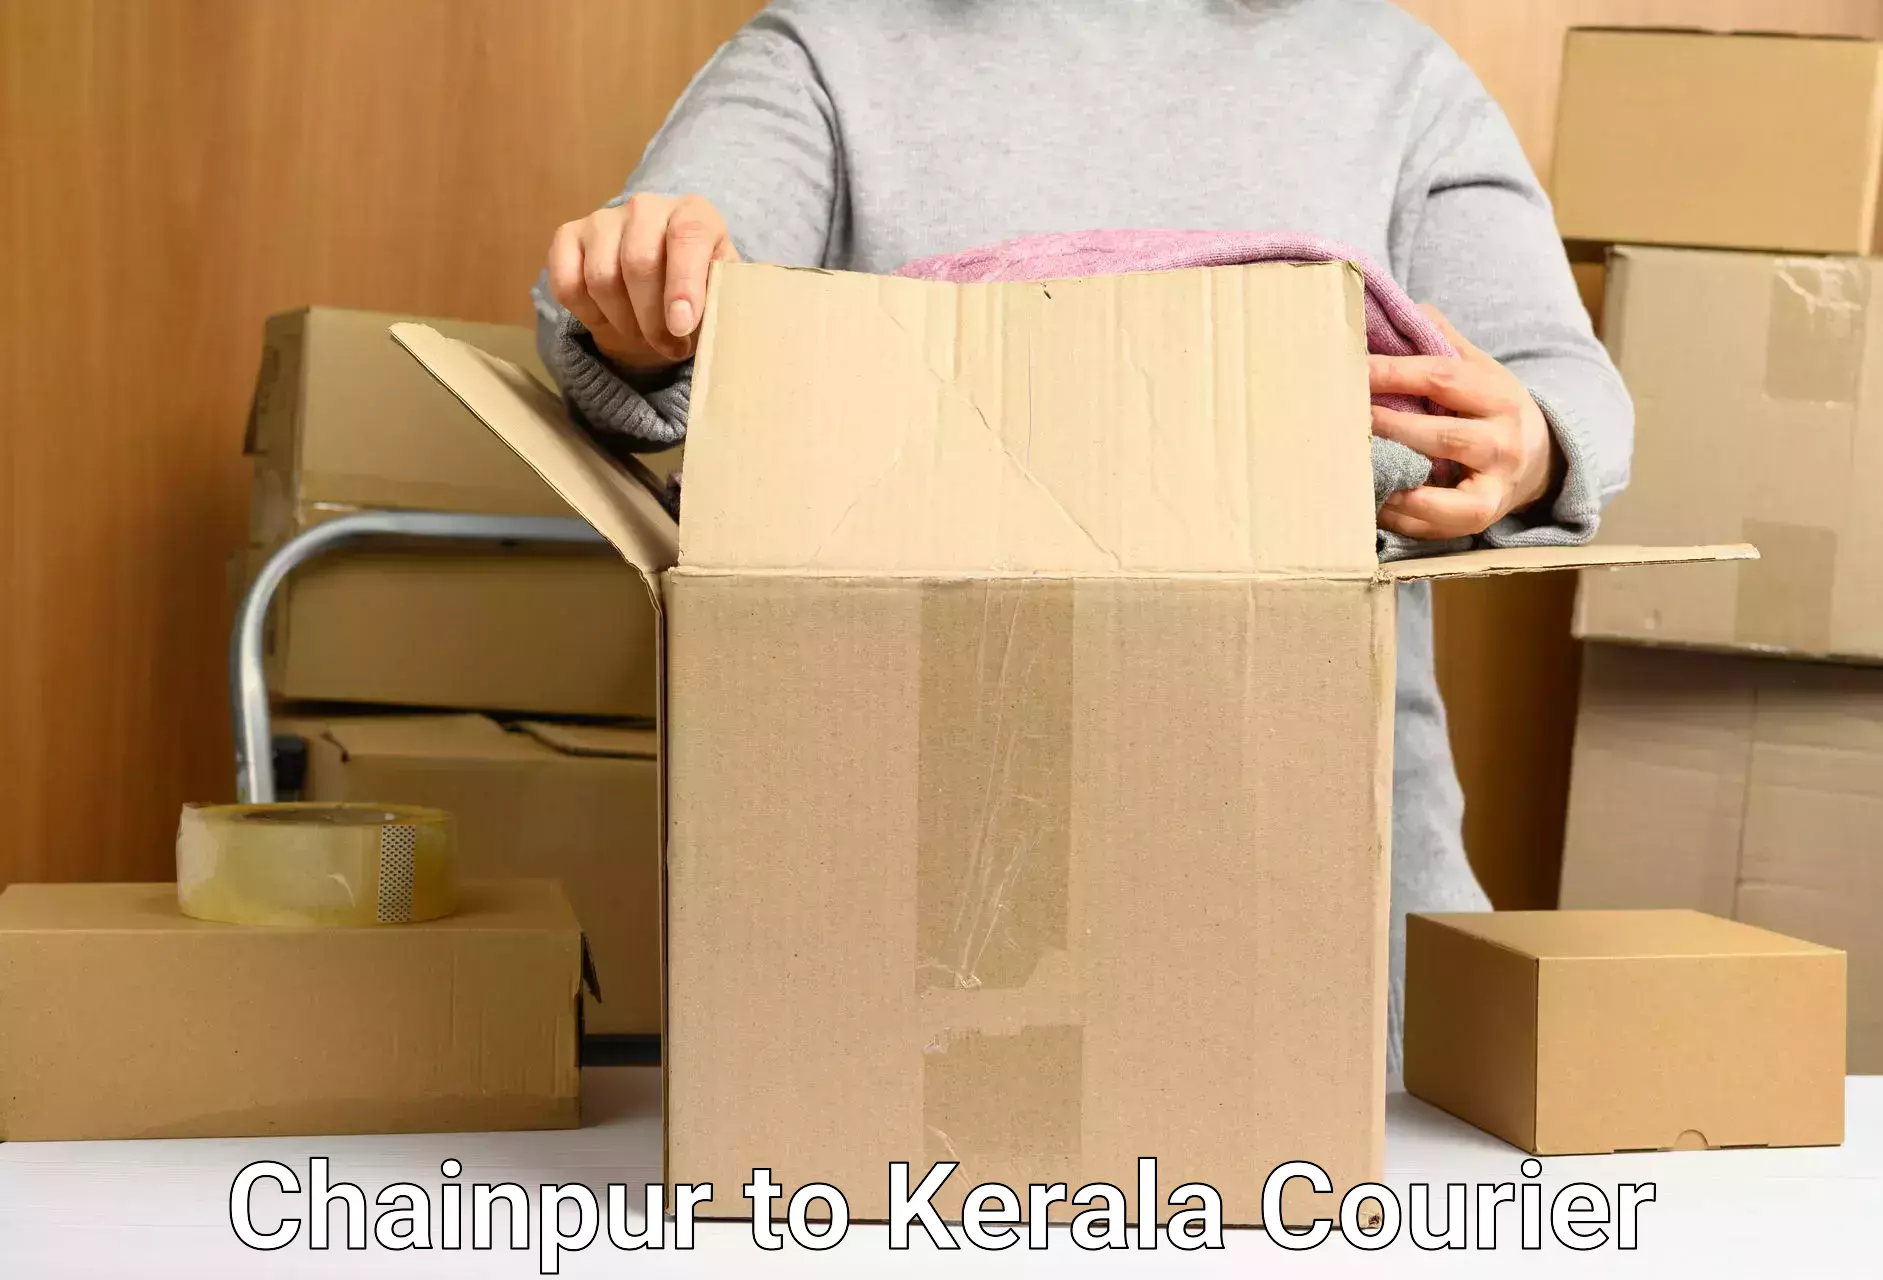 Secure packaging Chainpur to Cochin University of Science and Technology